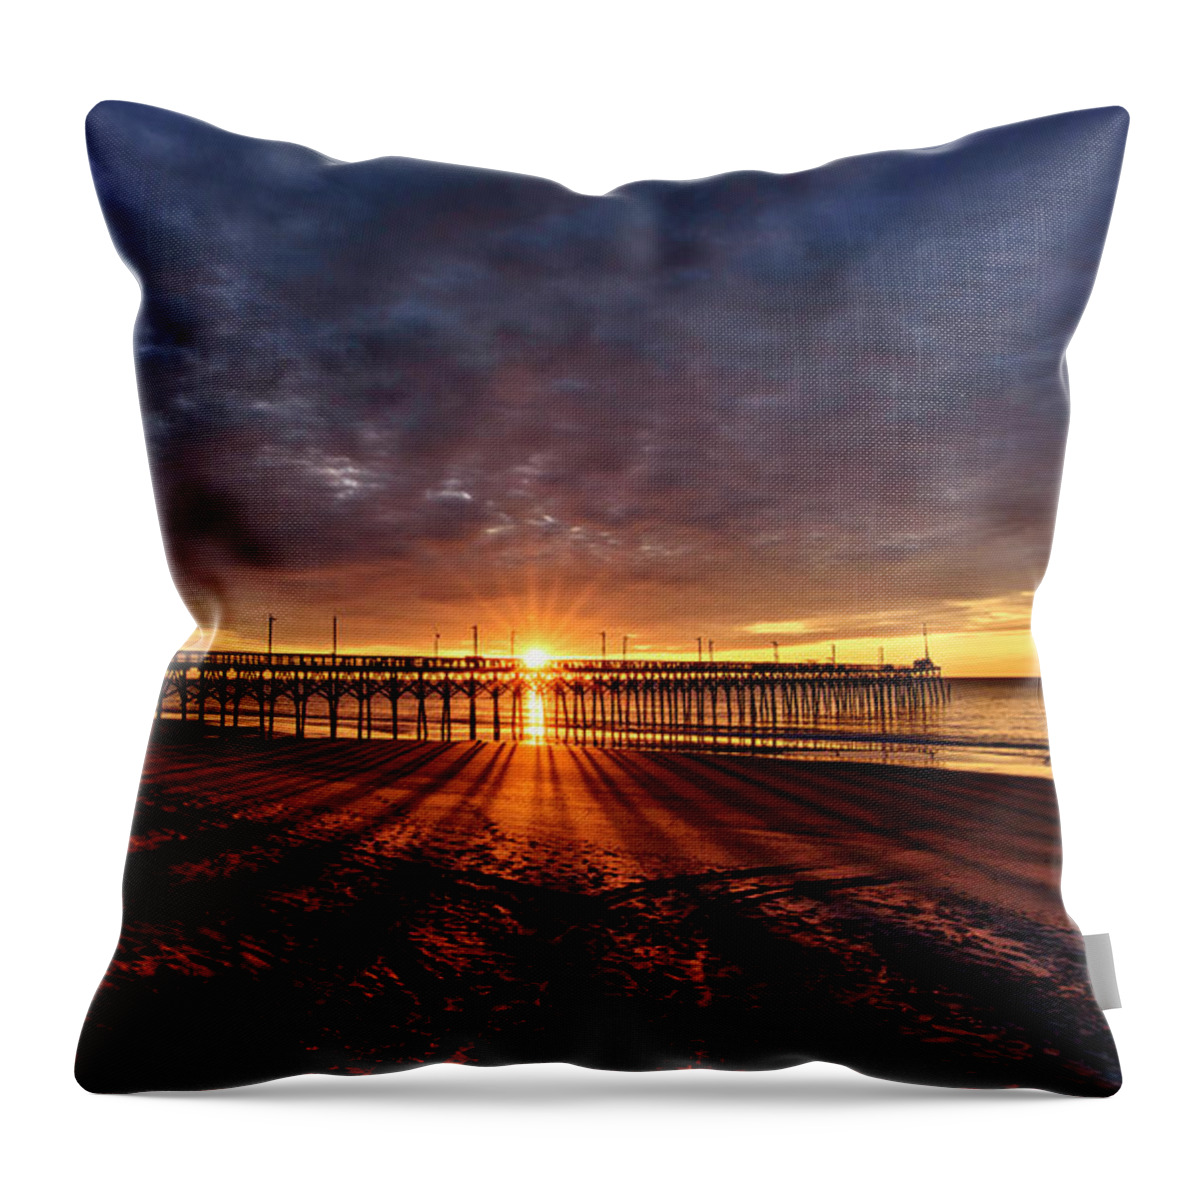 Sunrise Throw Pillow featuring the photograph Vertical Beams by DJA Images